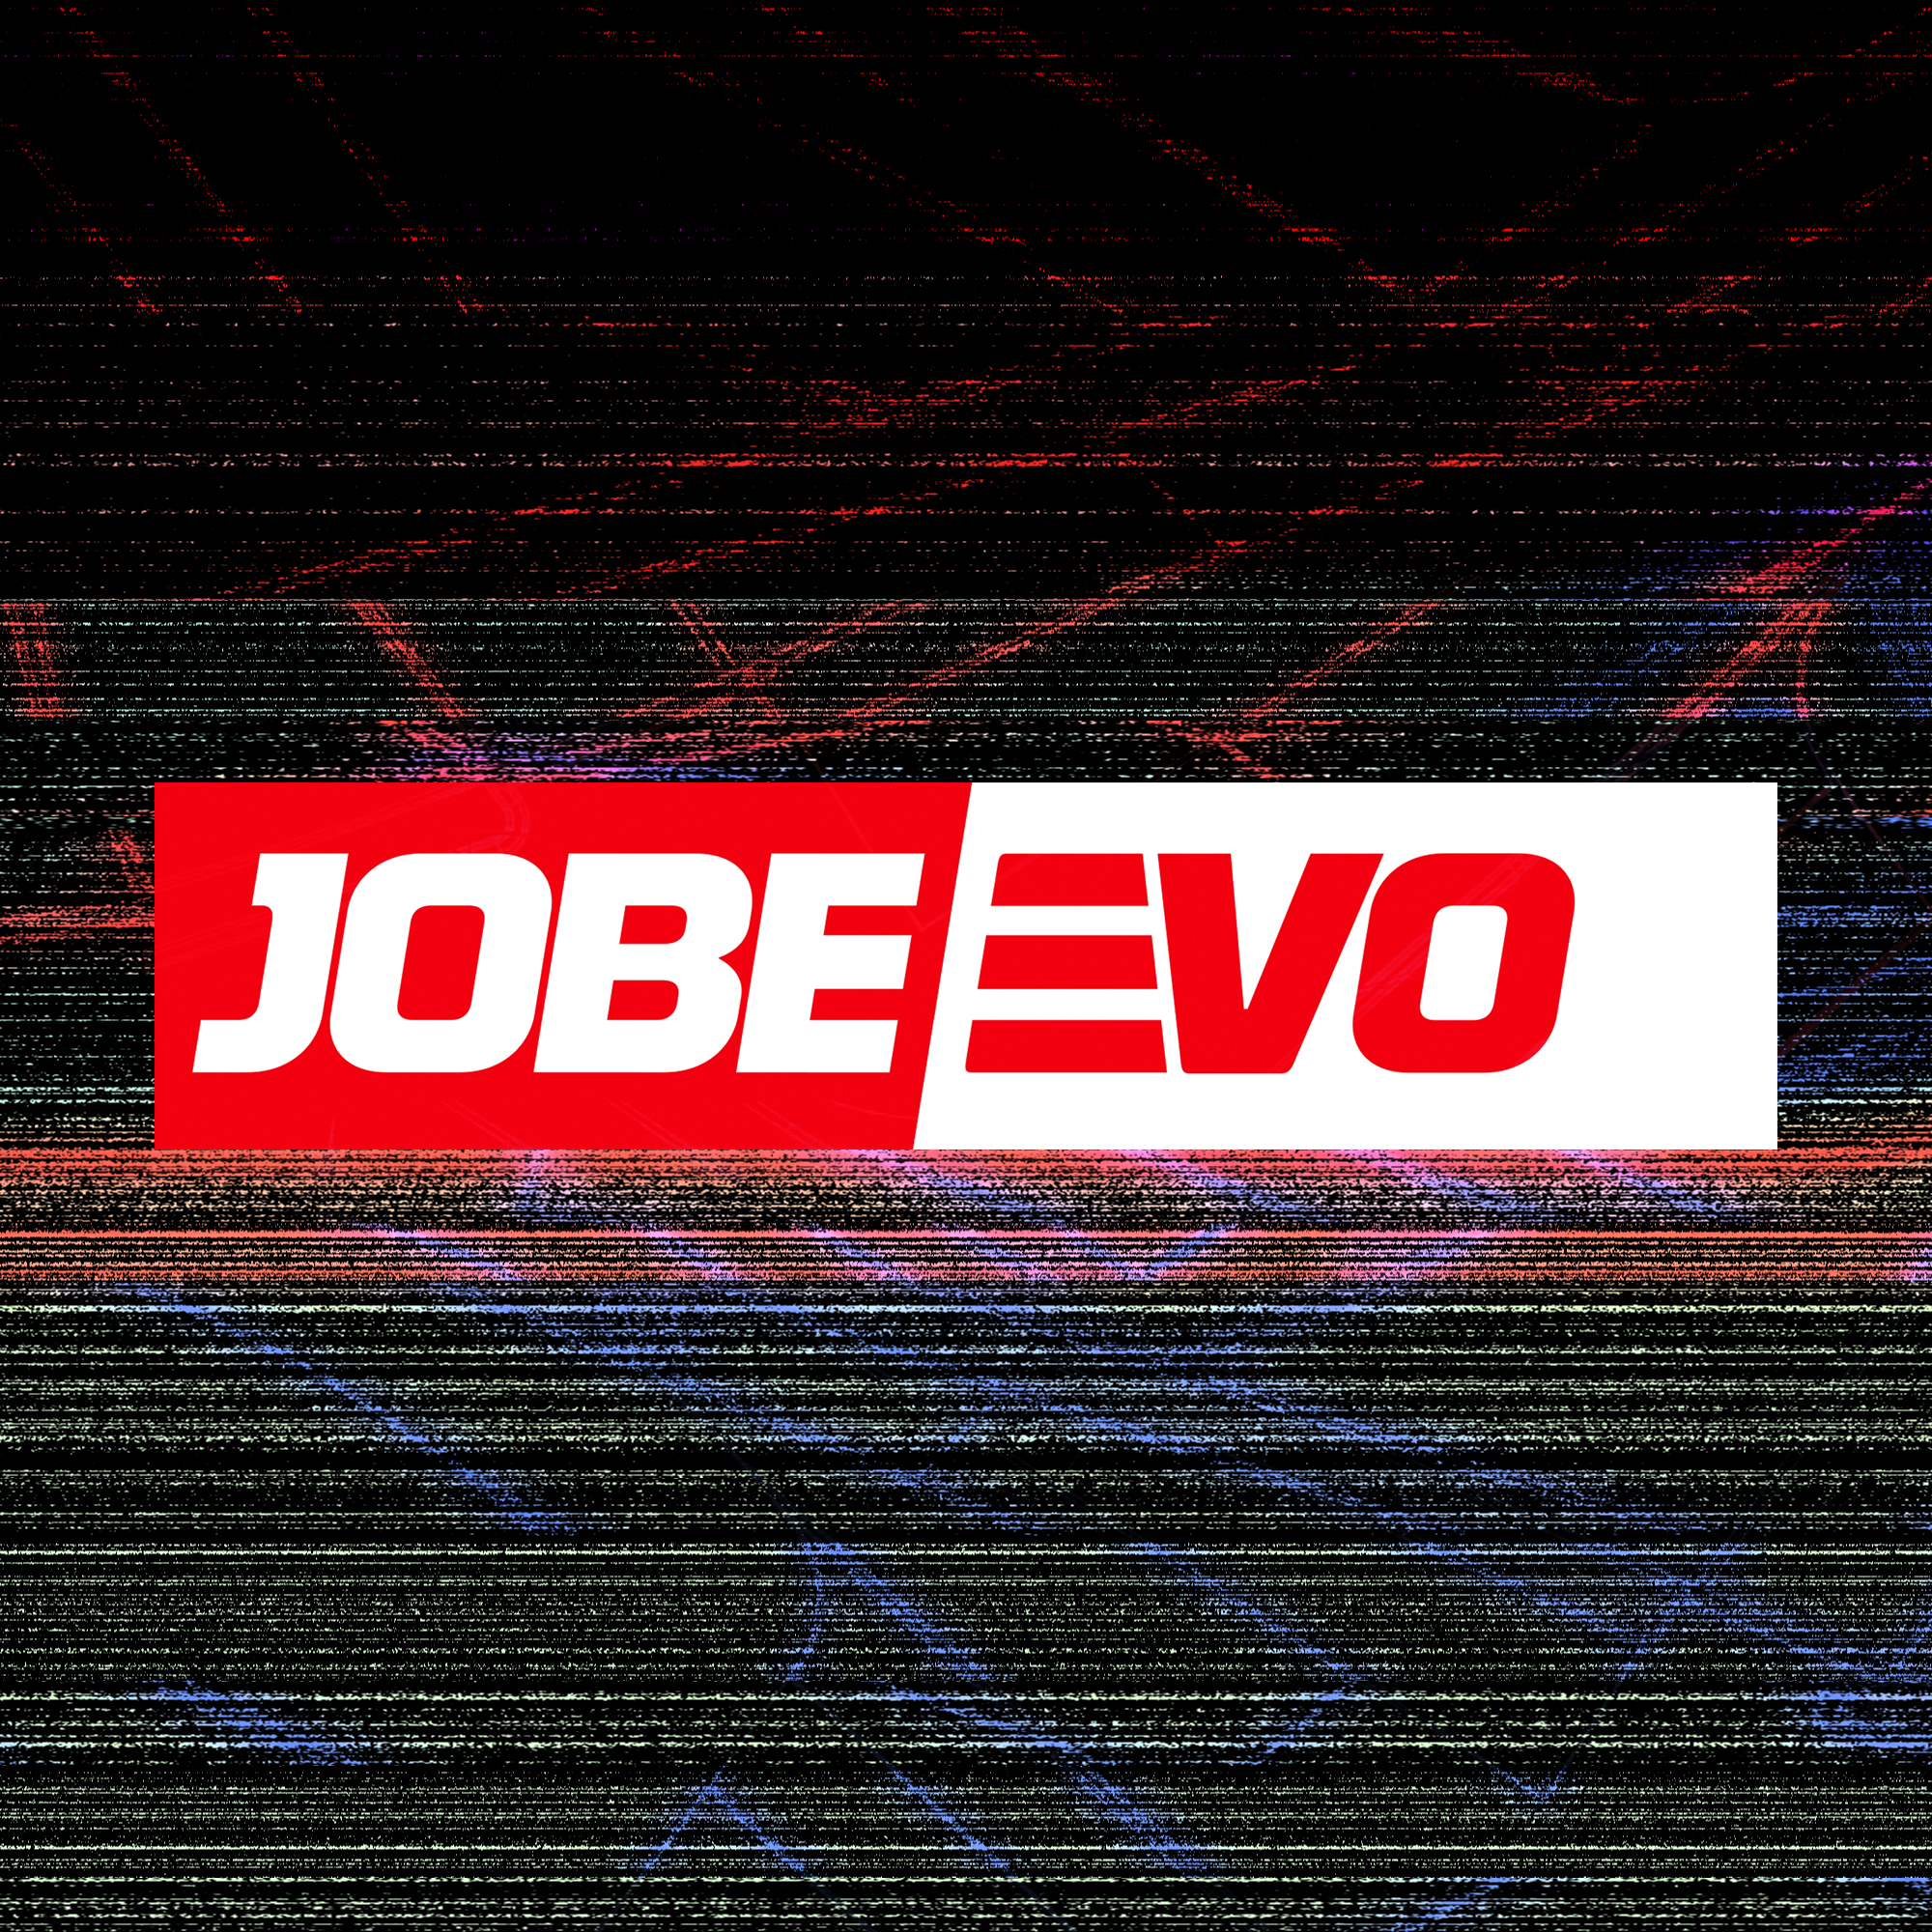 know about the jobe evo